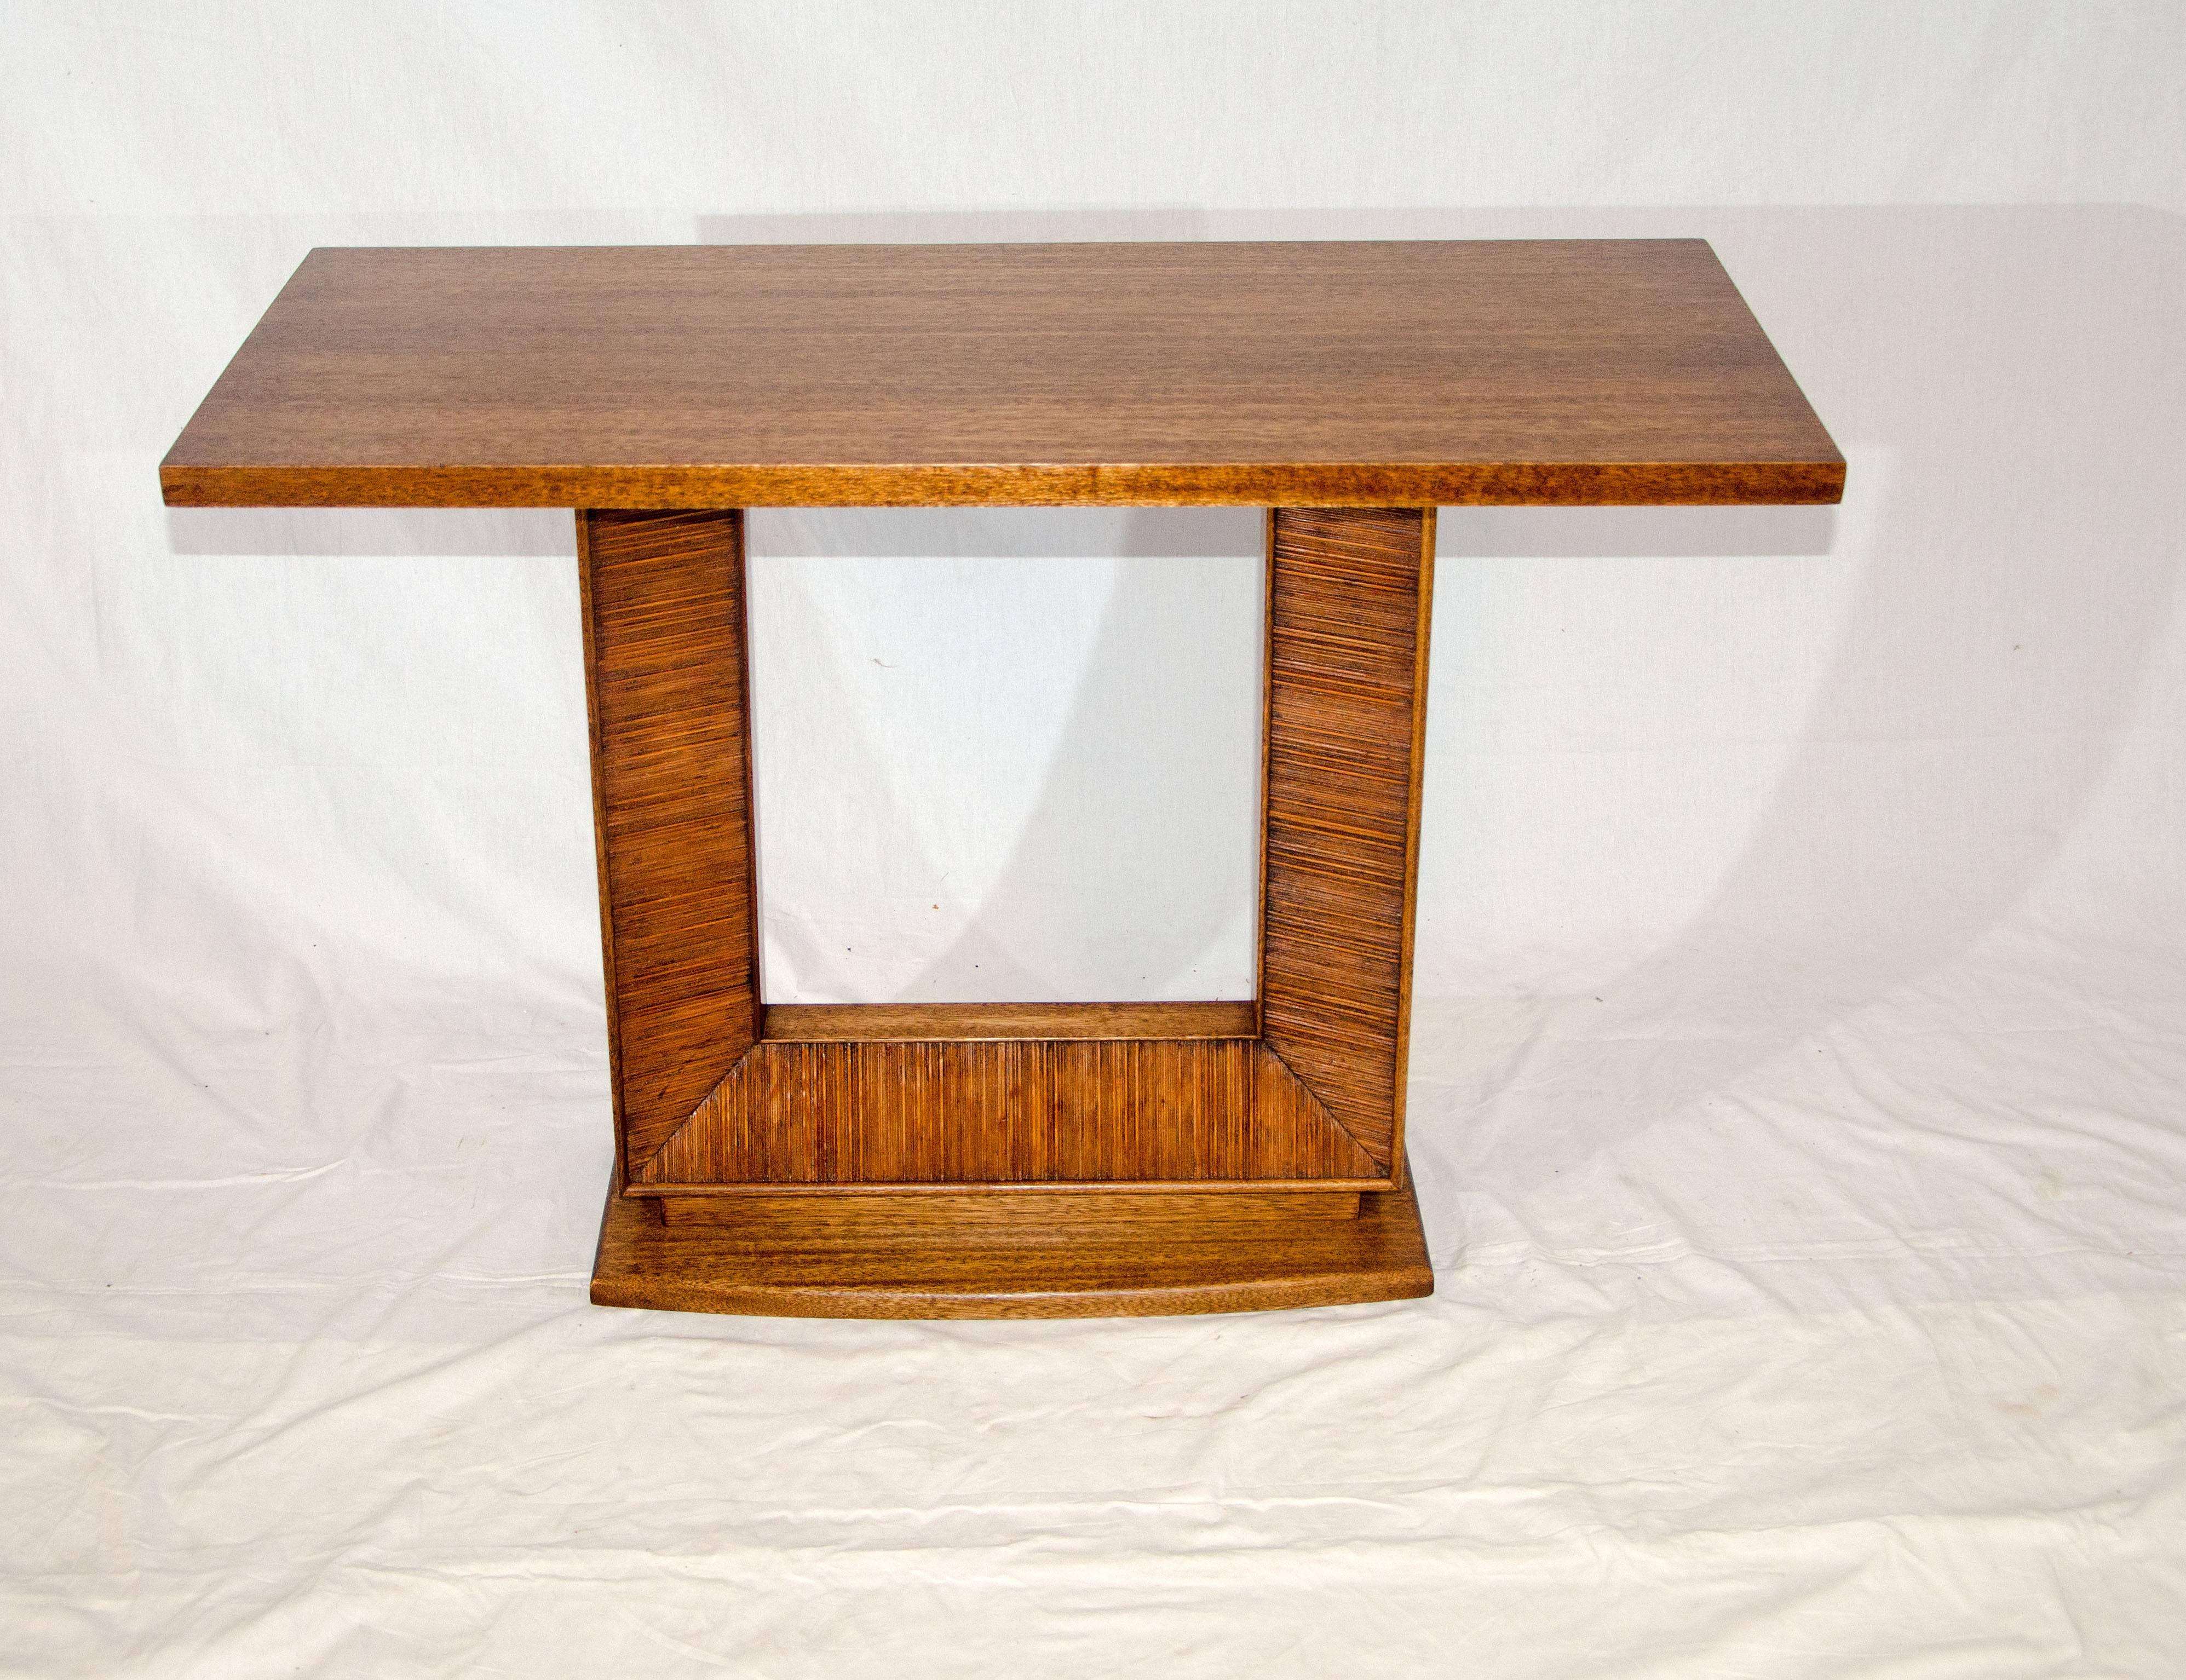 Very nice smaller size console table, perfect for an entry way, as an extra serving space in the dining room, or in the office as a printer stand. Would also be a great small table in a very small eating area.